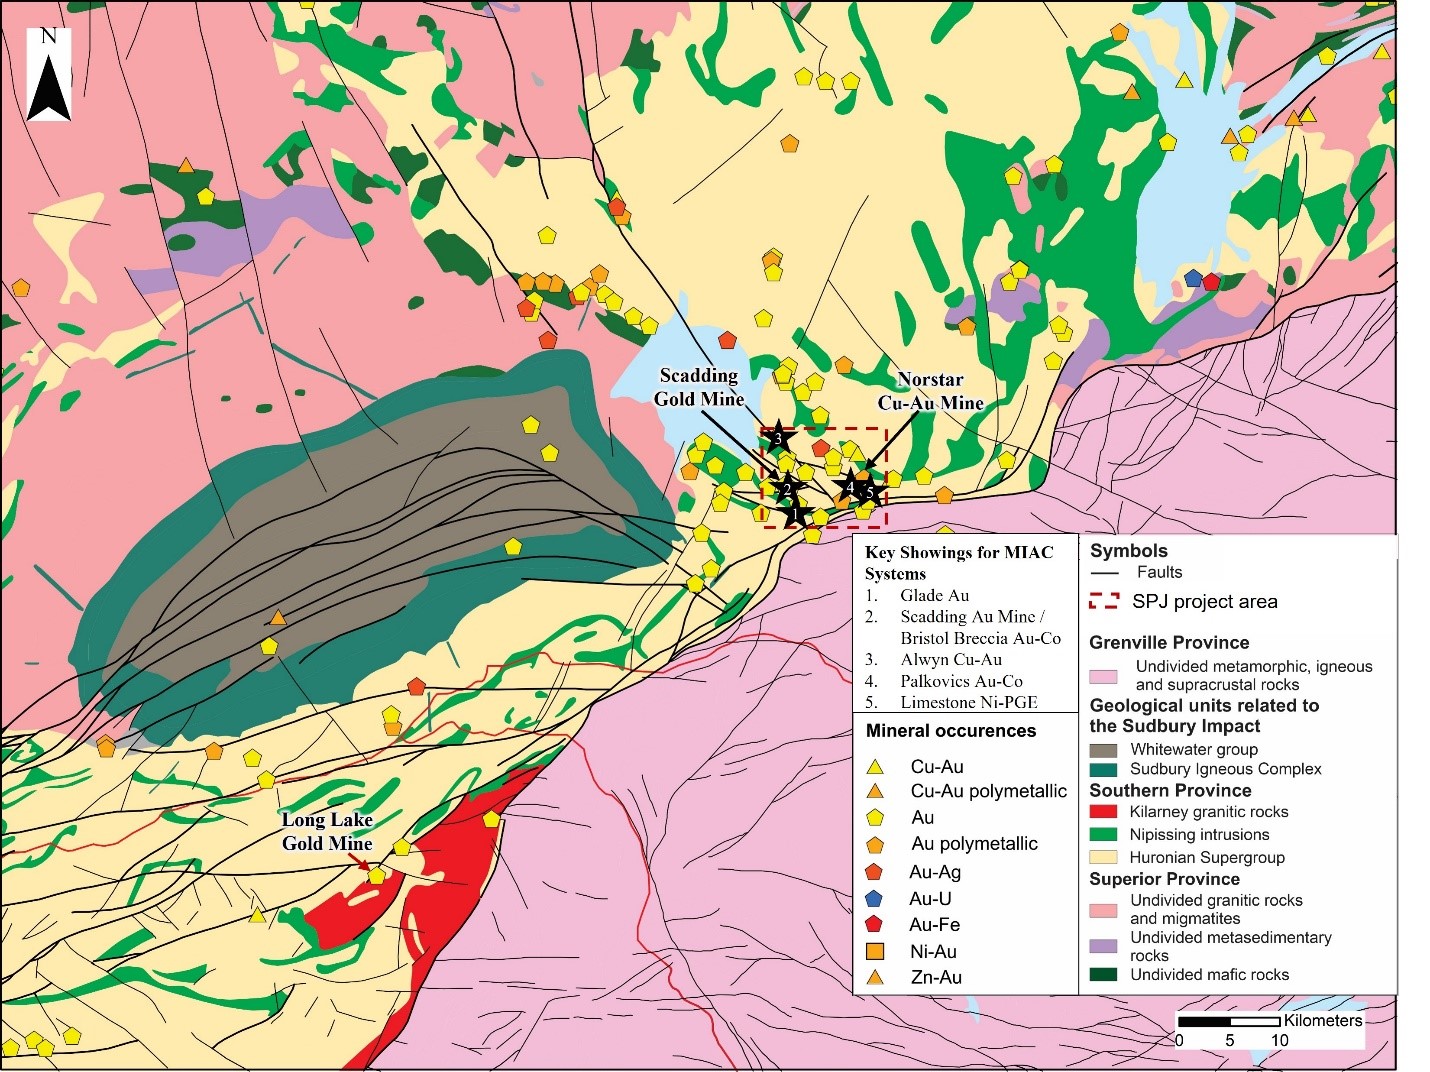 Regional geology of the Sudbury area. Geology from Ontario Geological Survey (2011) and mineral occurrences from Ontario Geological Survey (2023).